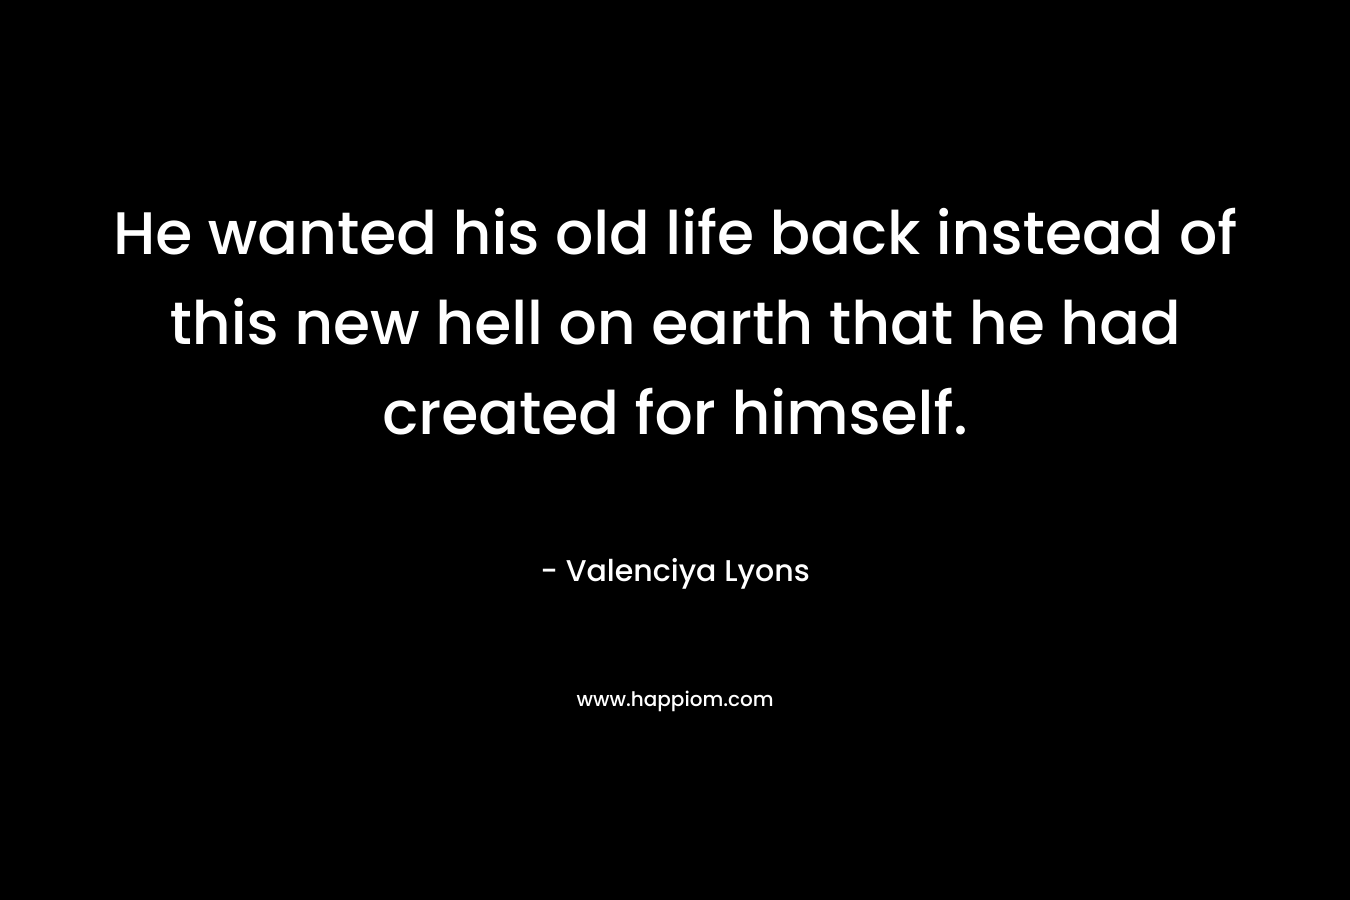 He wanted his old life back instead of this new hell on earth that he had created for himself.